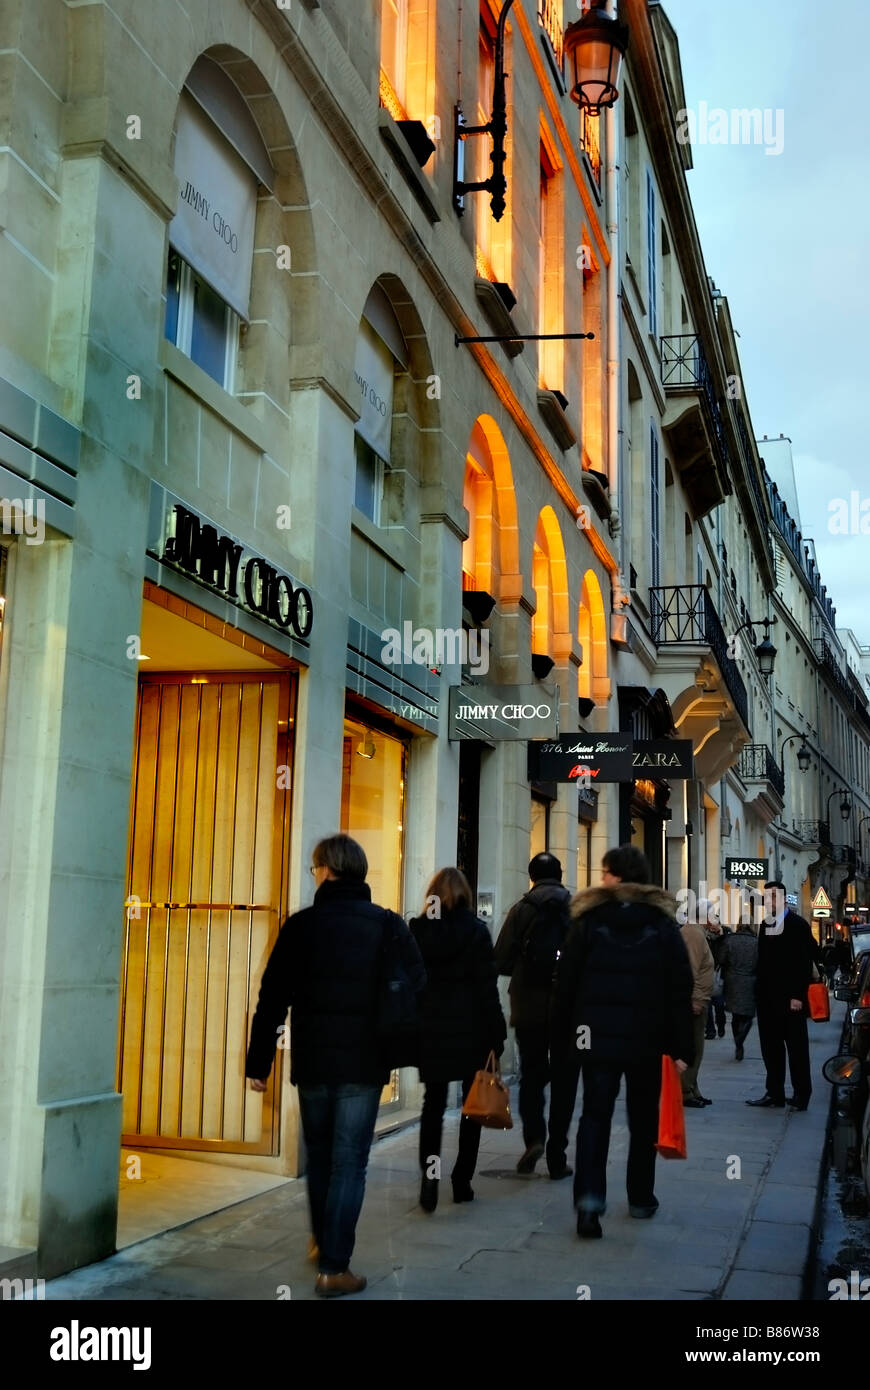 Paris France, Luxury Shopping "Rue Saint Honore" "Jimmy Choo" Old French  Storefront, shop window scene Vintage, Prestige consumer, busy street Paris  Stock Photo - Alamy